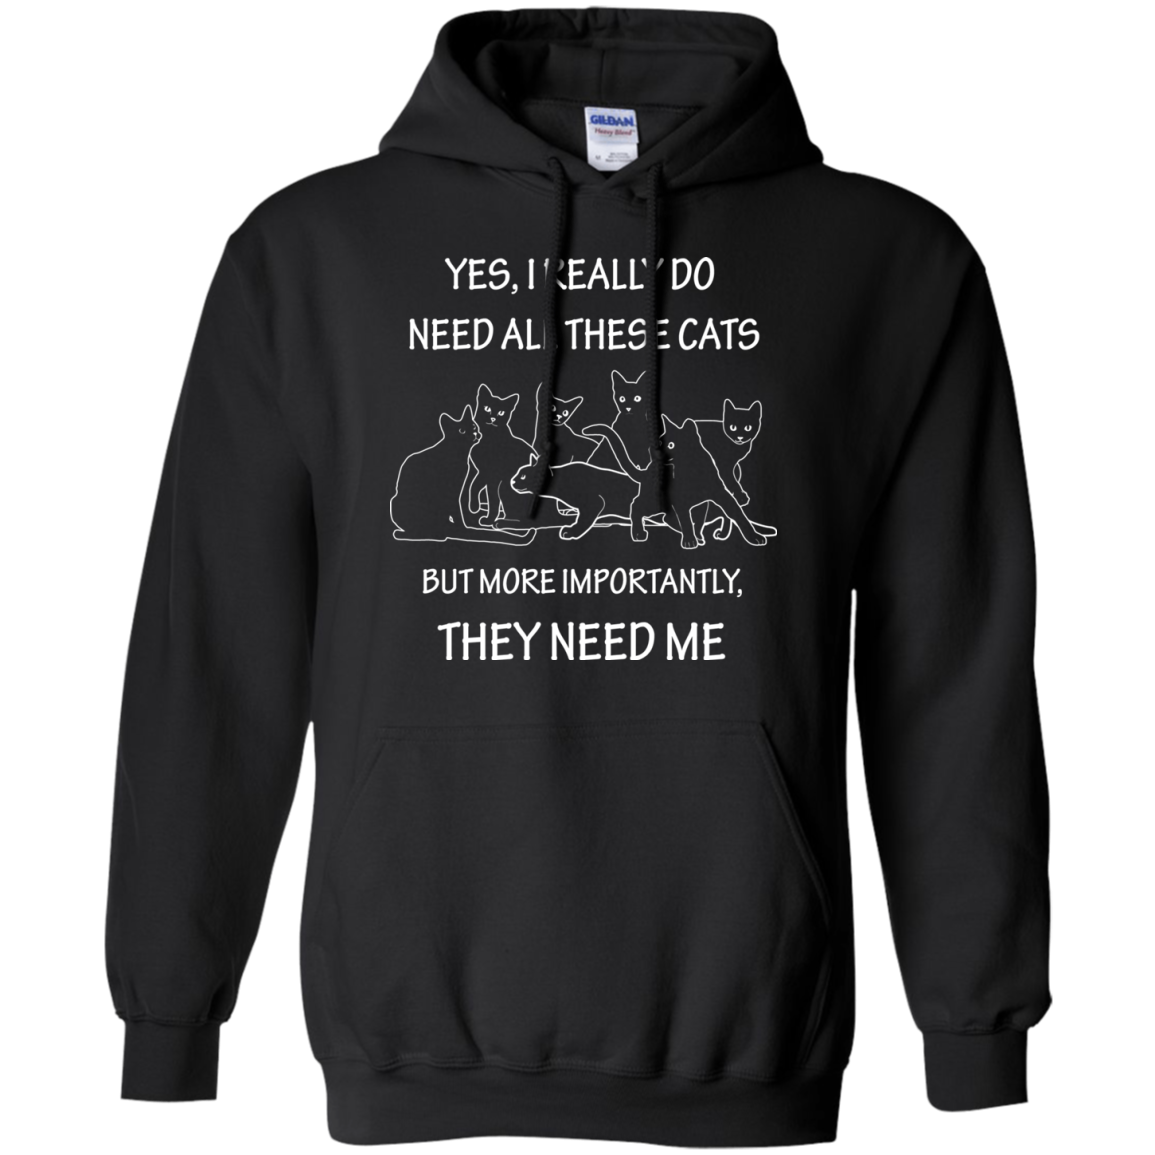 They Need Me Pullover Hoodie